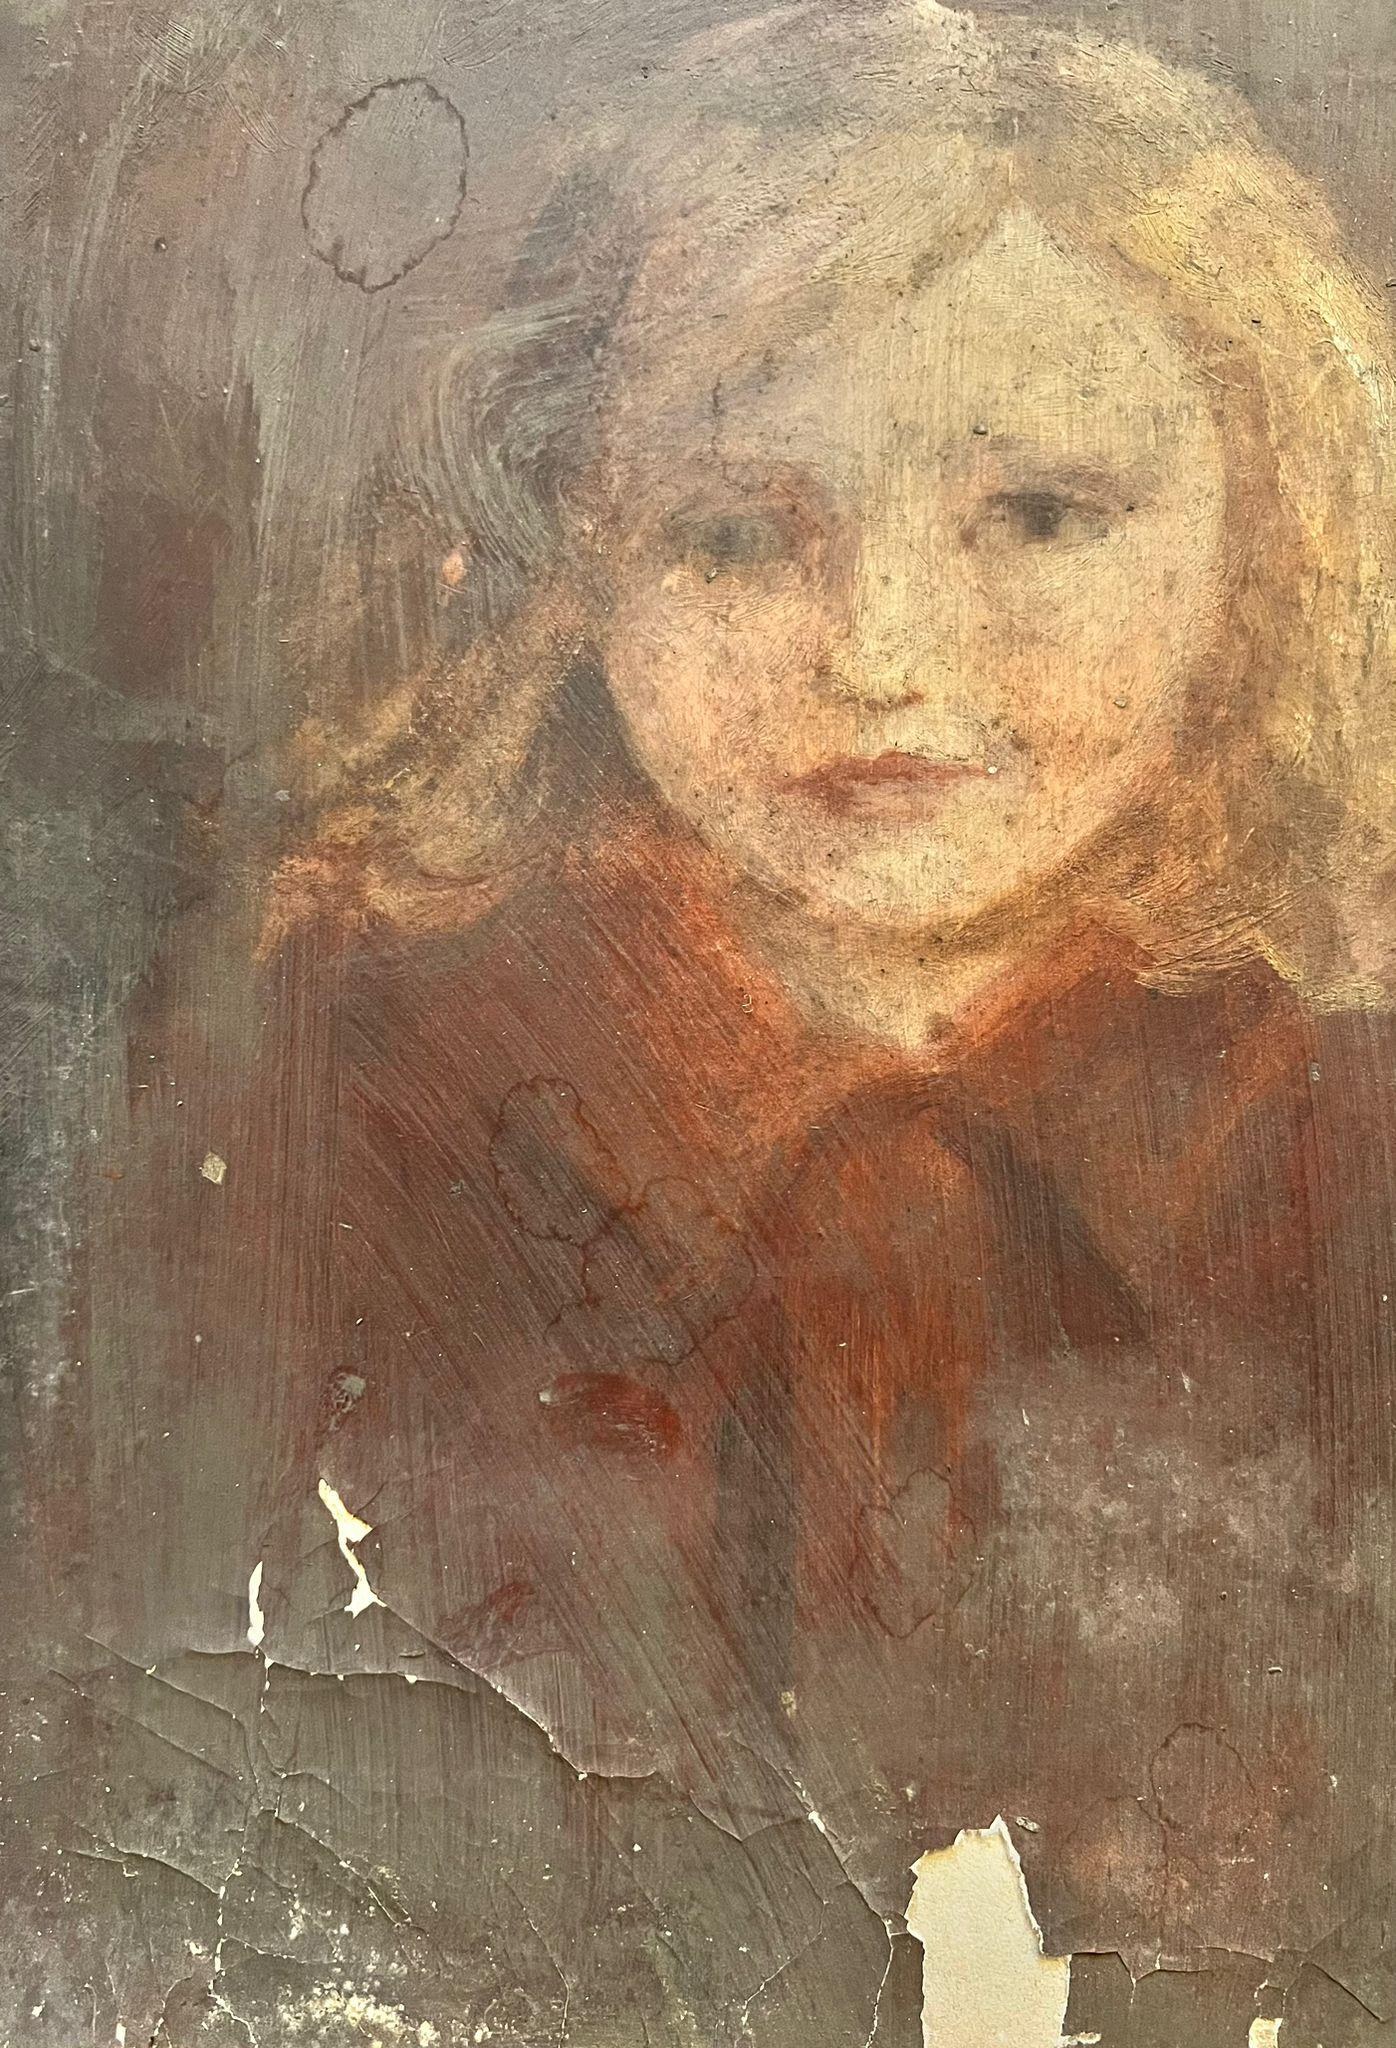 Artist/ School: English School, late 19th/ early 20th century.
The painting came from a large collection of works by one artist. A very few of them are signed what looks to be 'F. Wardle'. 

Title: Young Girl Portrait

Medium: oil on board,